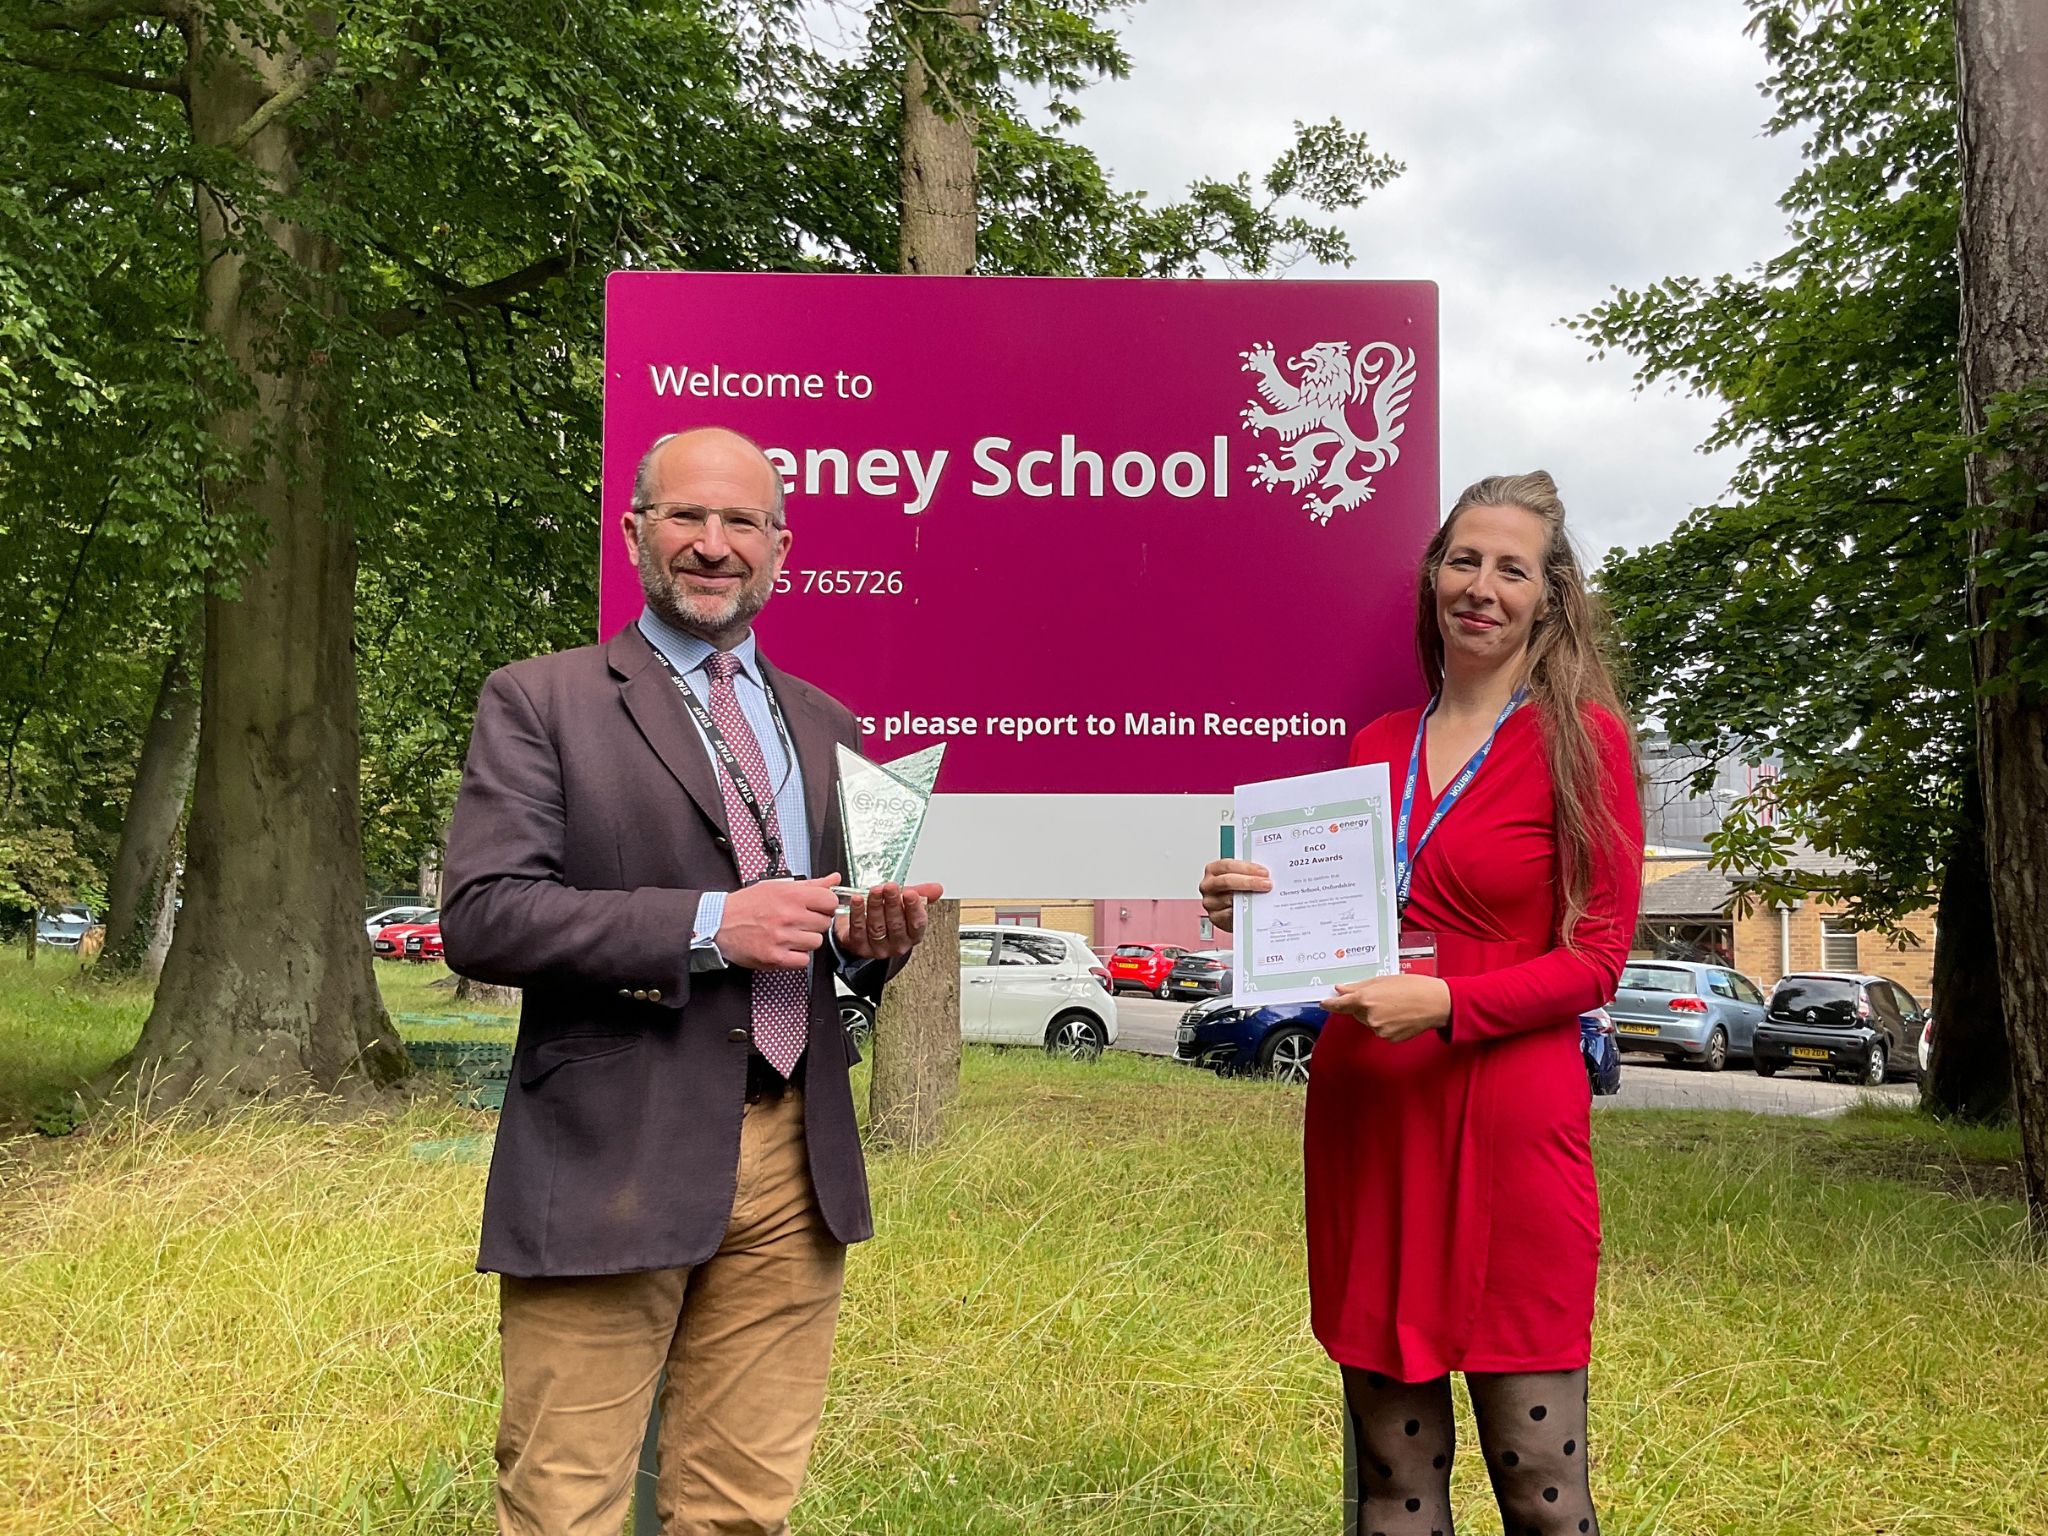 Headteacher Rob Pavey being presented with EnCo Award 2022 from Energy Management Consultant, Wendy Cheeseman